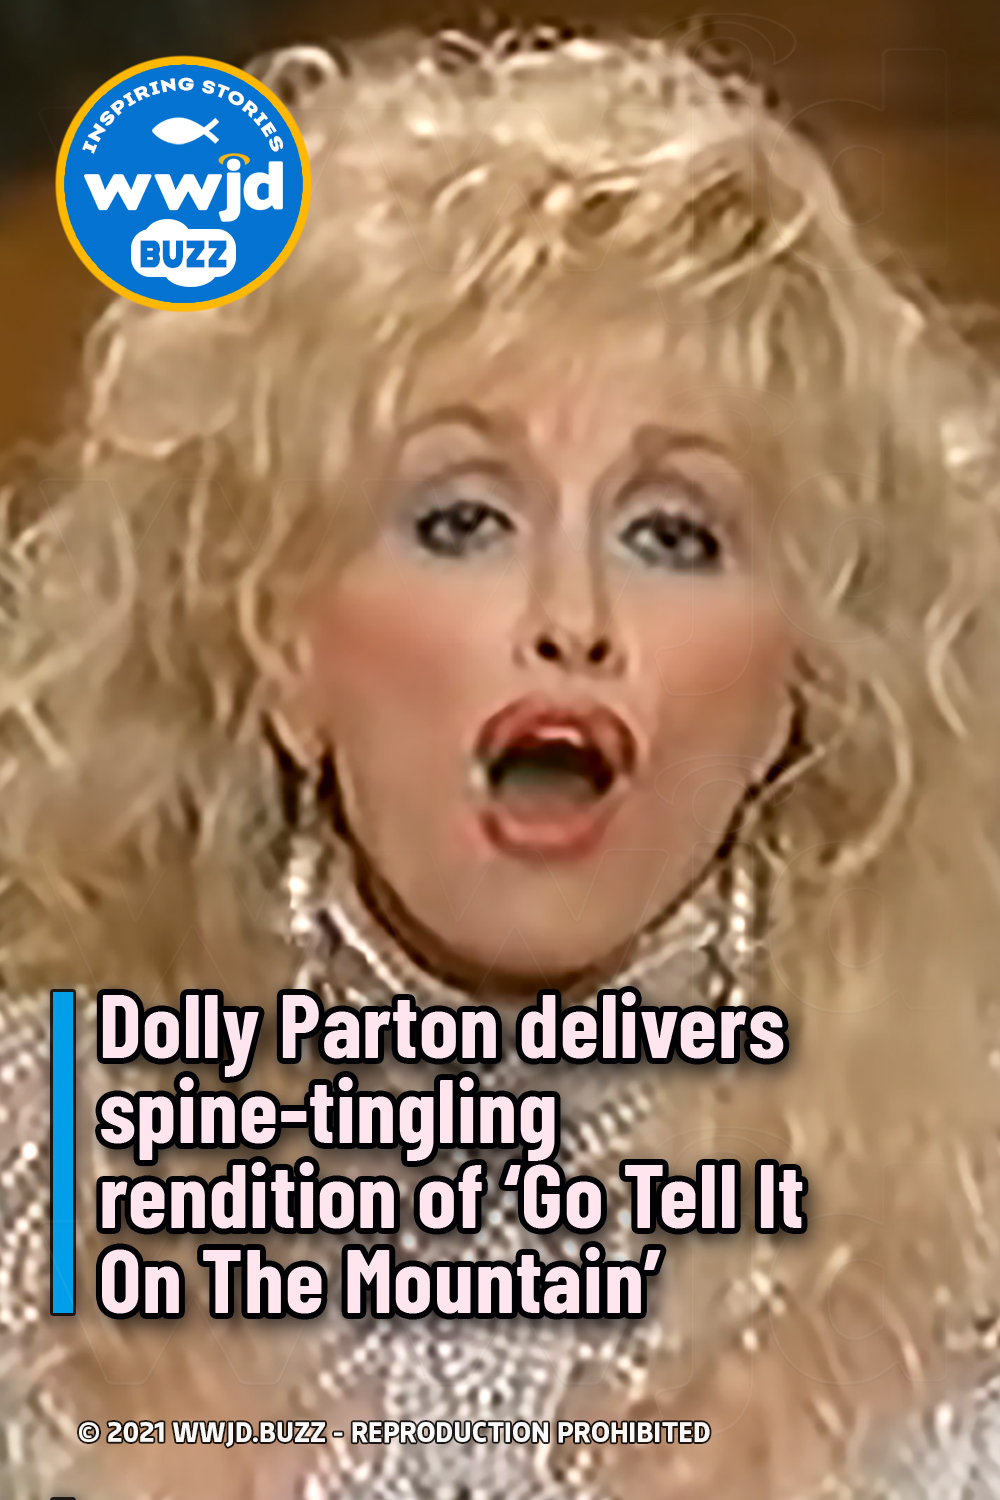 Dolly Parton delivers spine-tingling rendition of \'Go Tell It On The Mountain\'